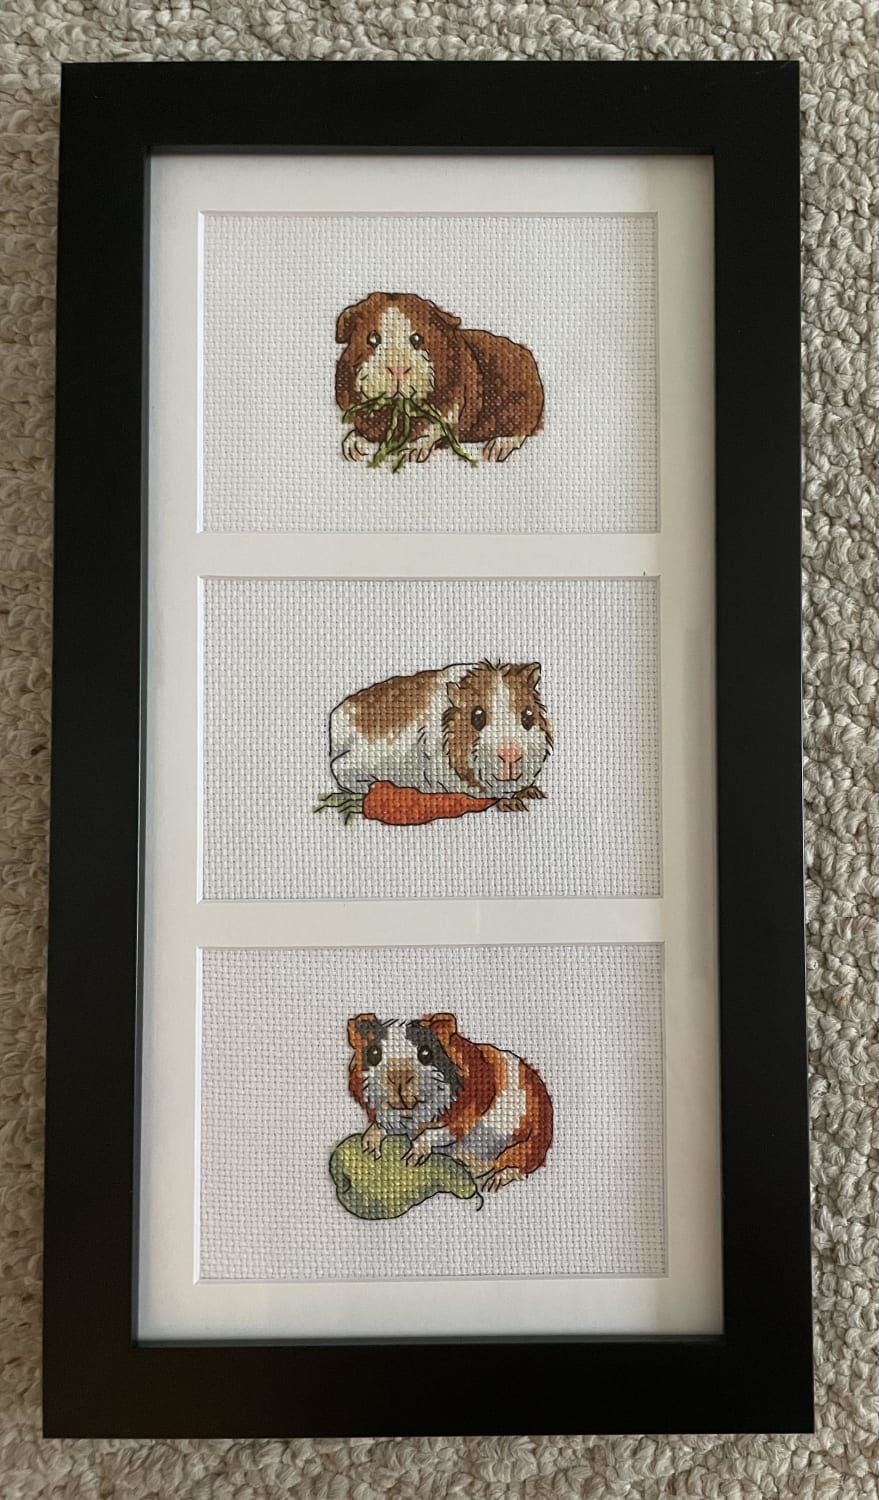 [FO] trio of Guinea pigs I stitched while sitting with my wife in her chemo sessions